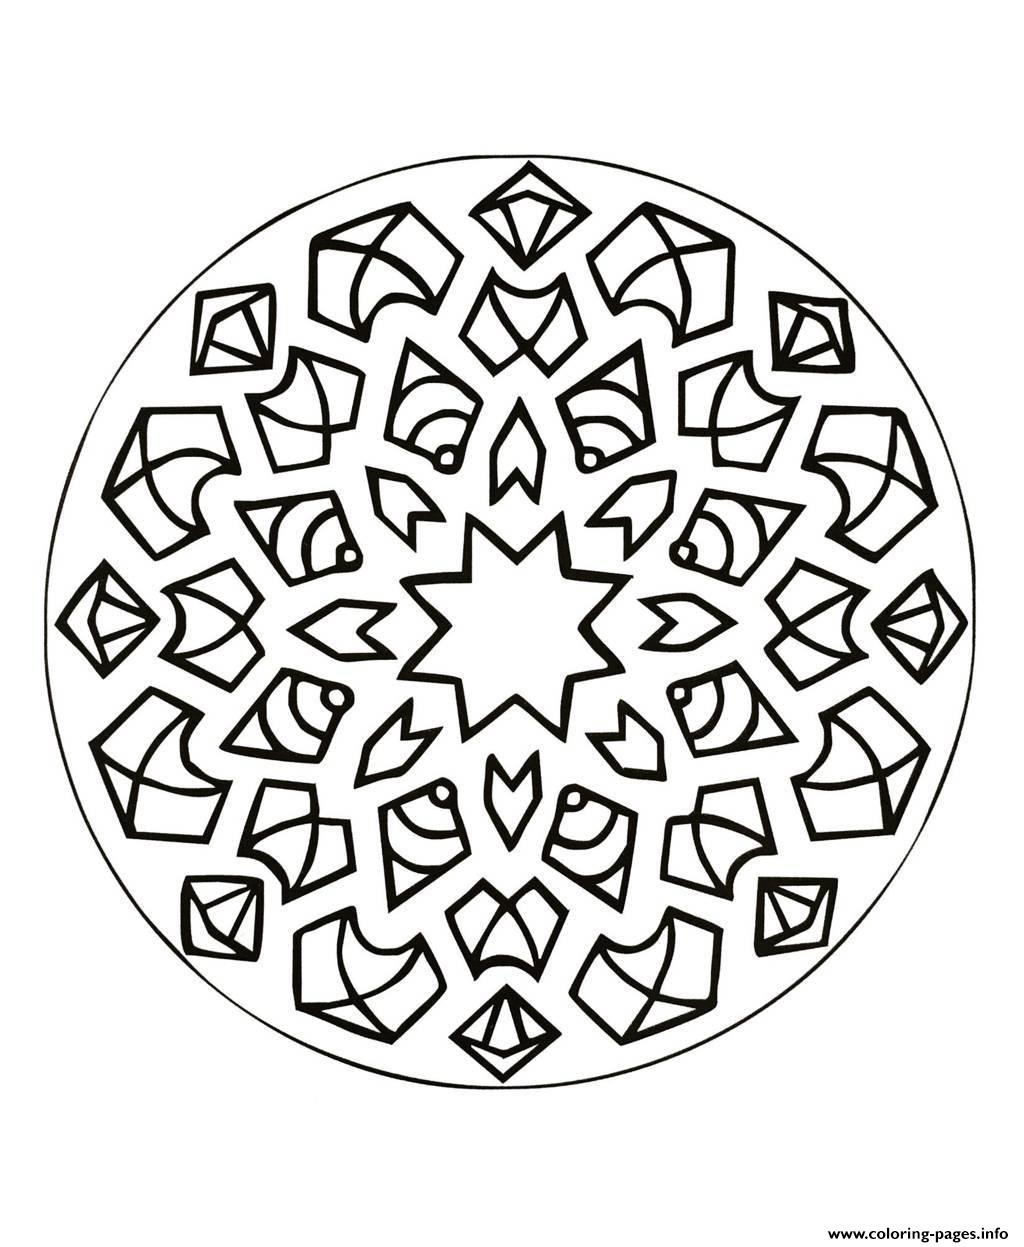 Mandalas To Download For Free 25  coloring